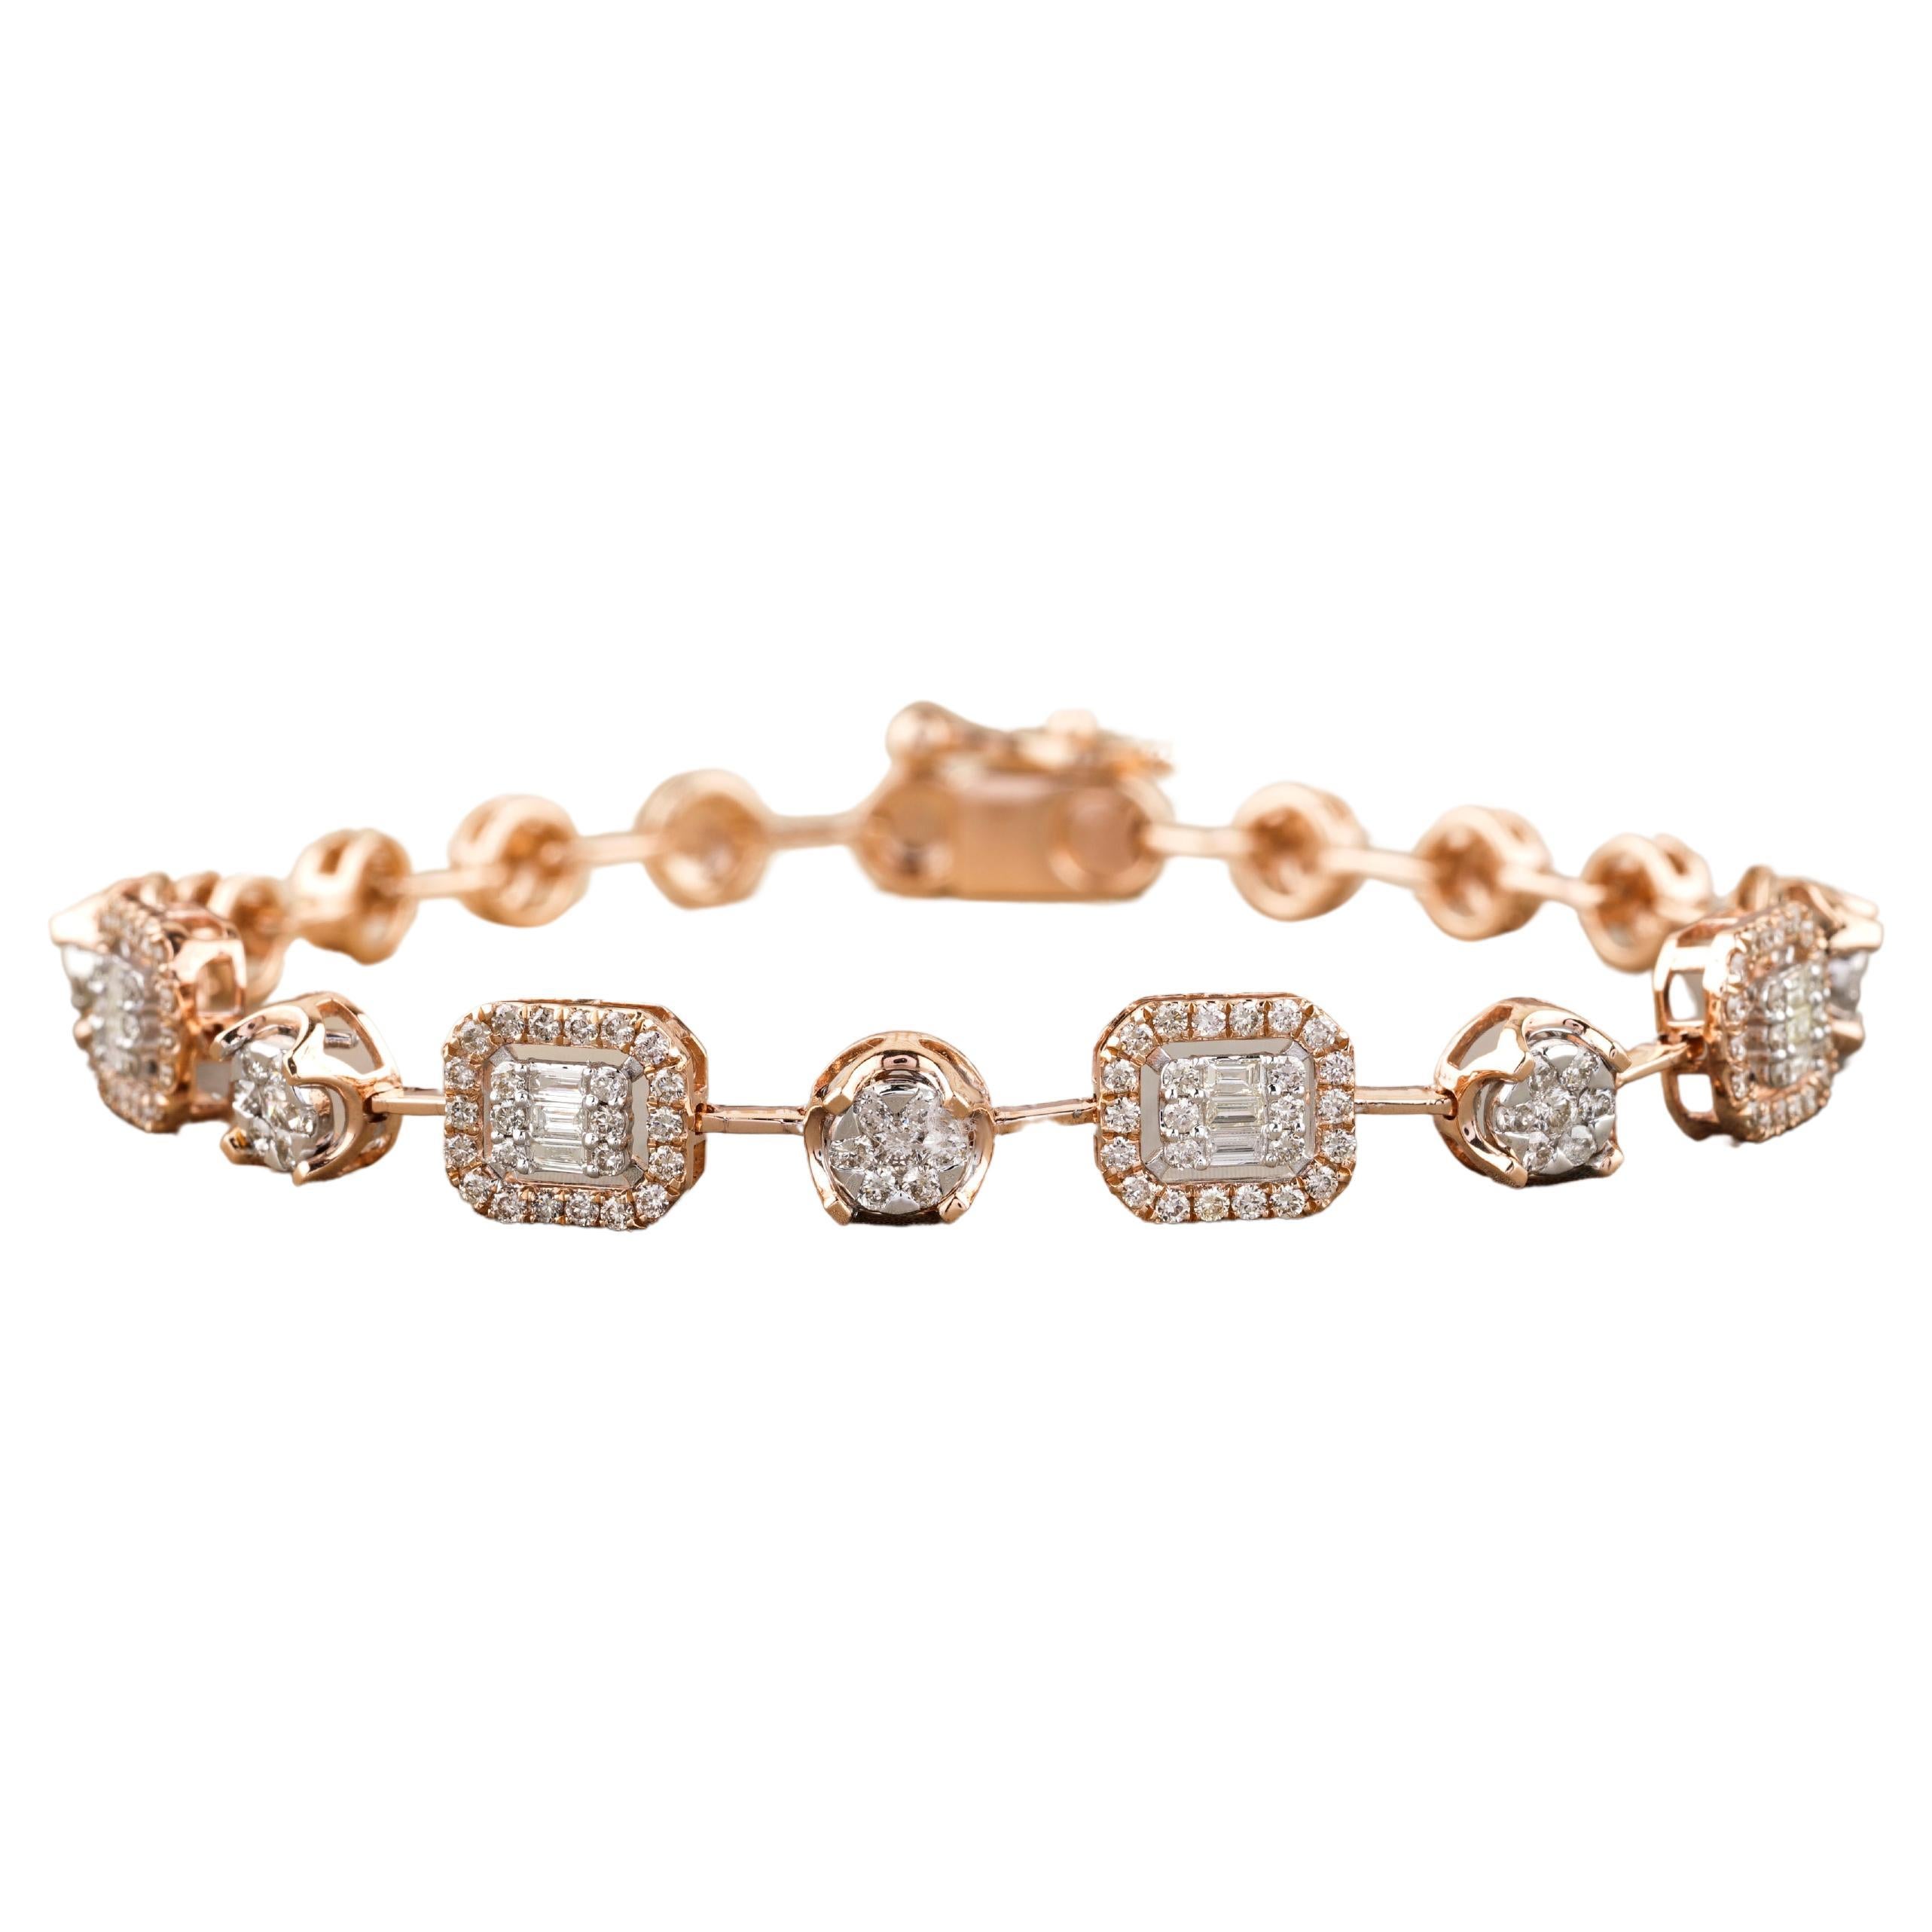 Round & Baguette Diamond Tennis Bracelet With Illusion Setting in 18k Solid Gold